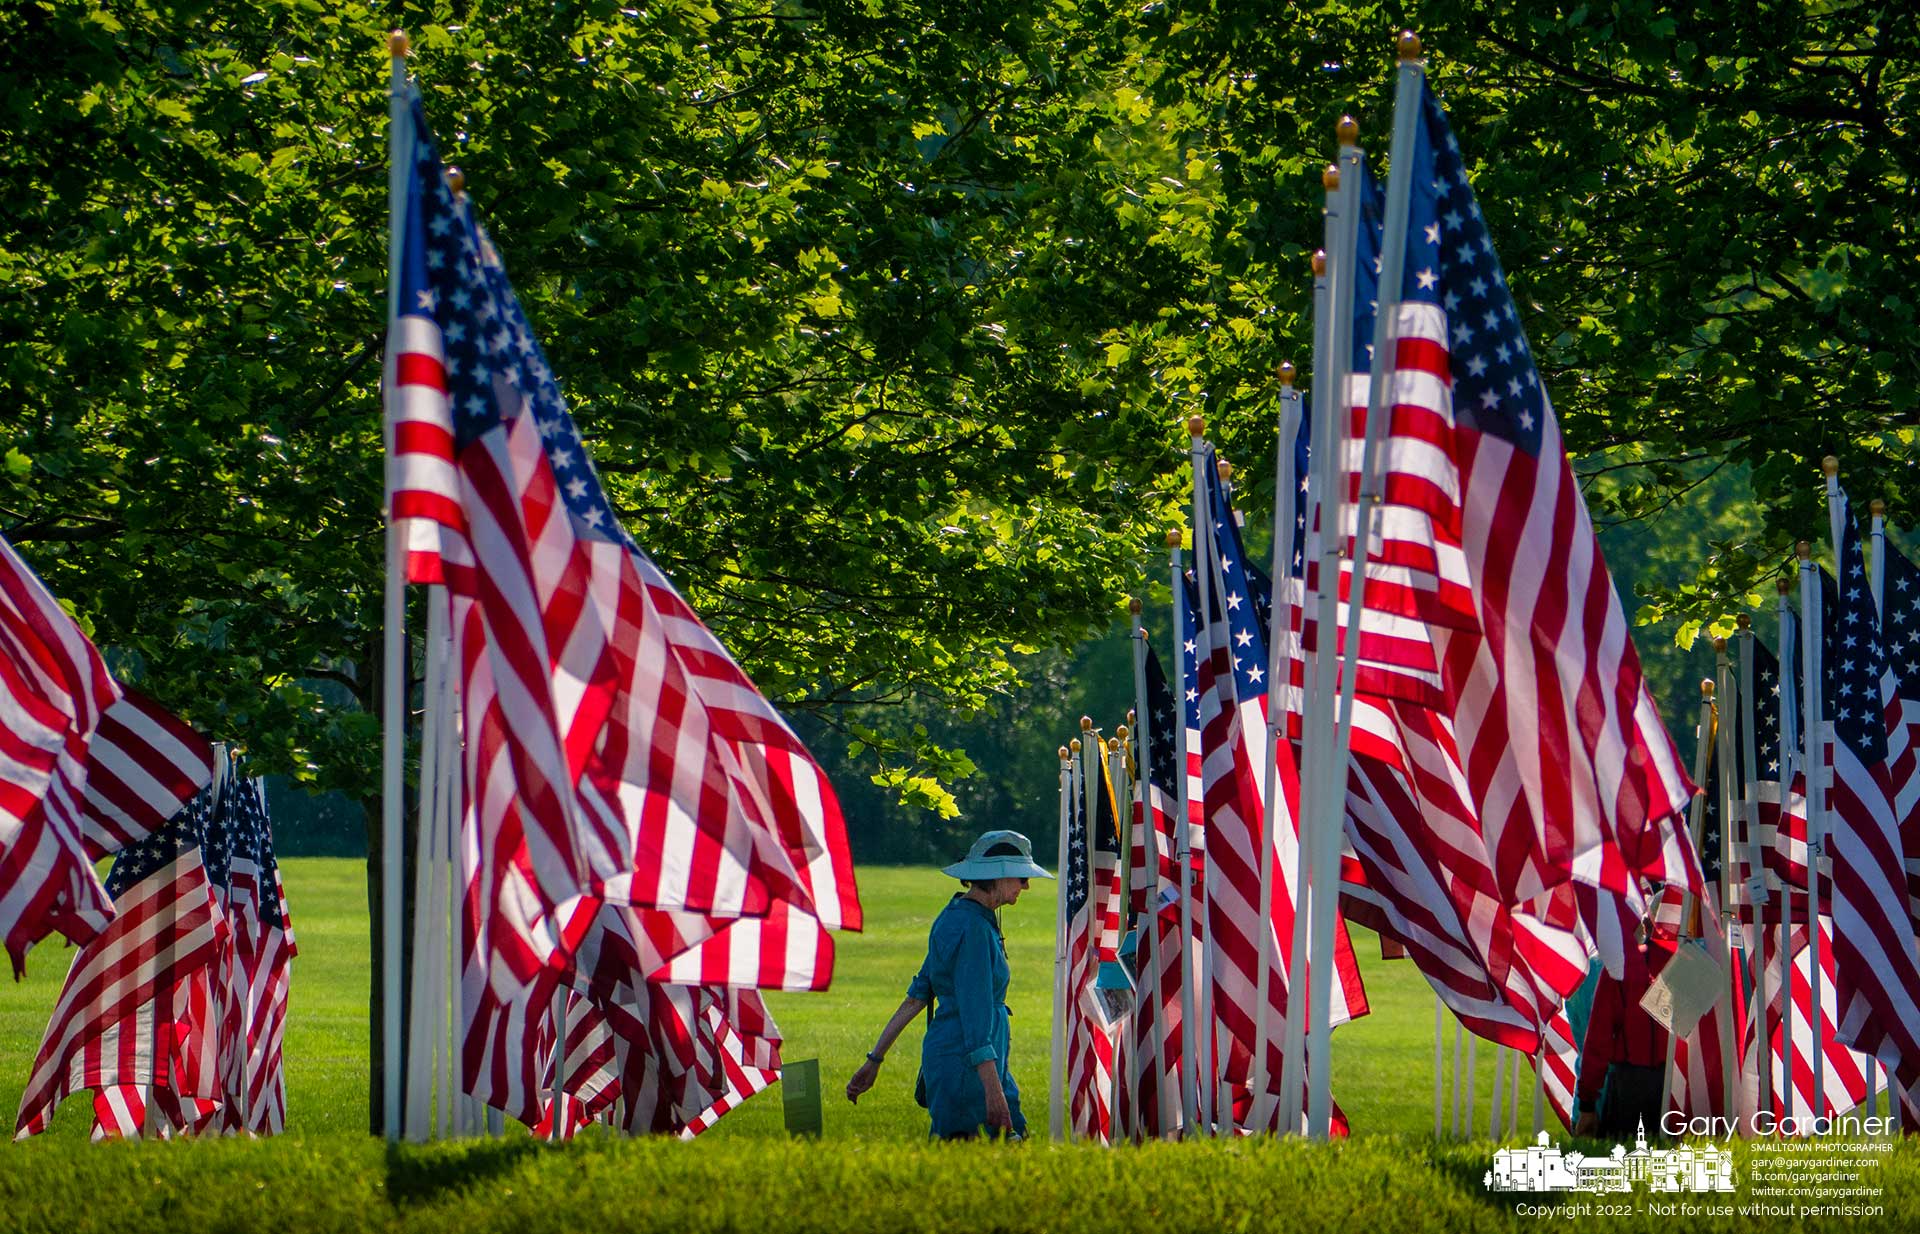 A woman walks through a partially shaded section of the Field of Heroes in Westerville where 3,000 American flags are erected honoring personal and military heroes. My Final Photo for May 29, 2022.